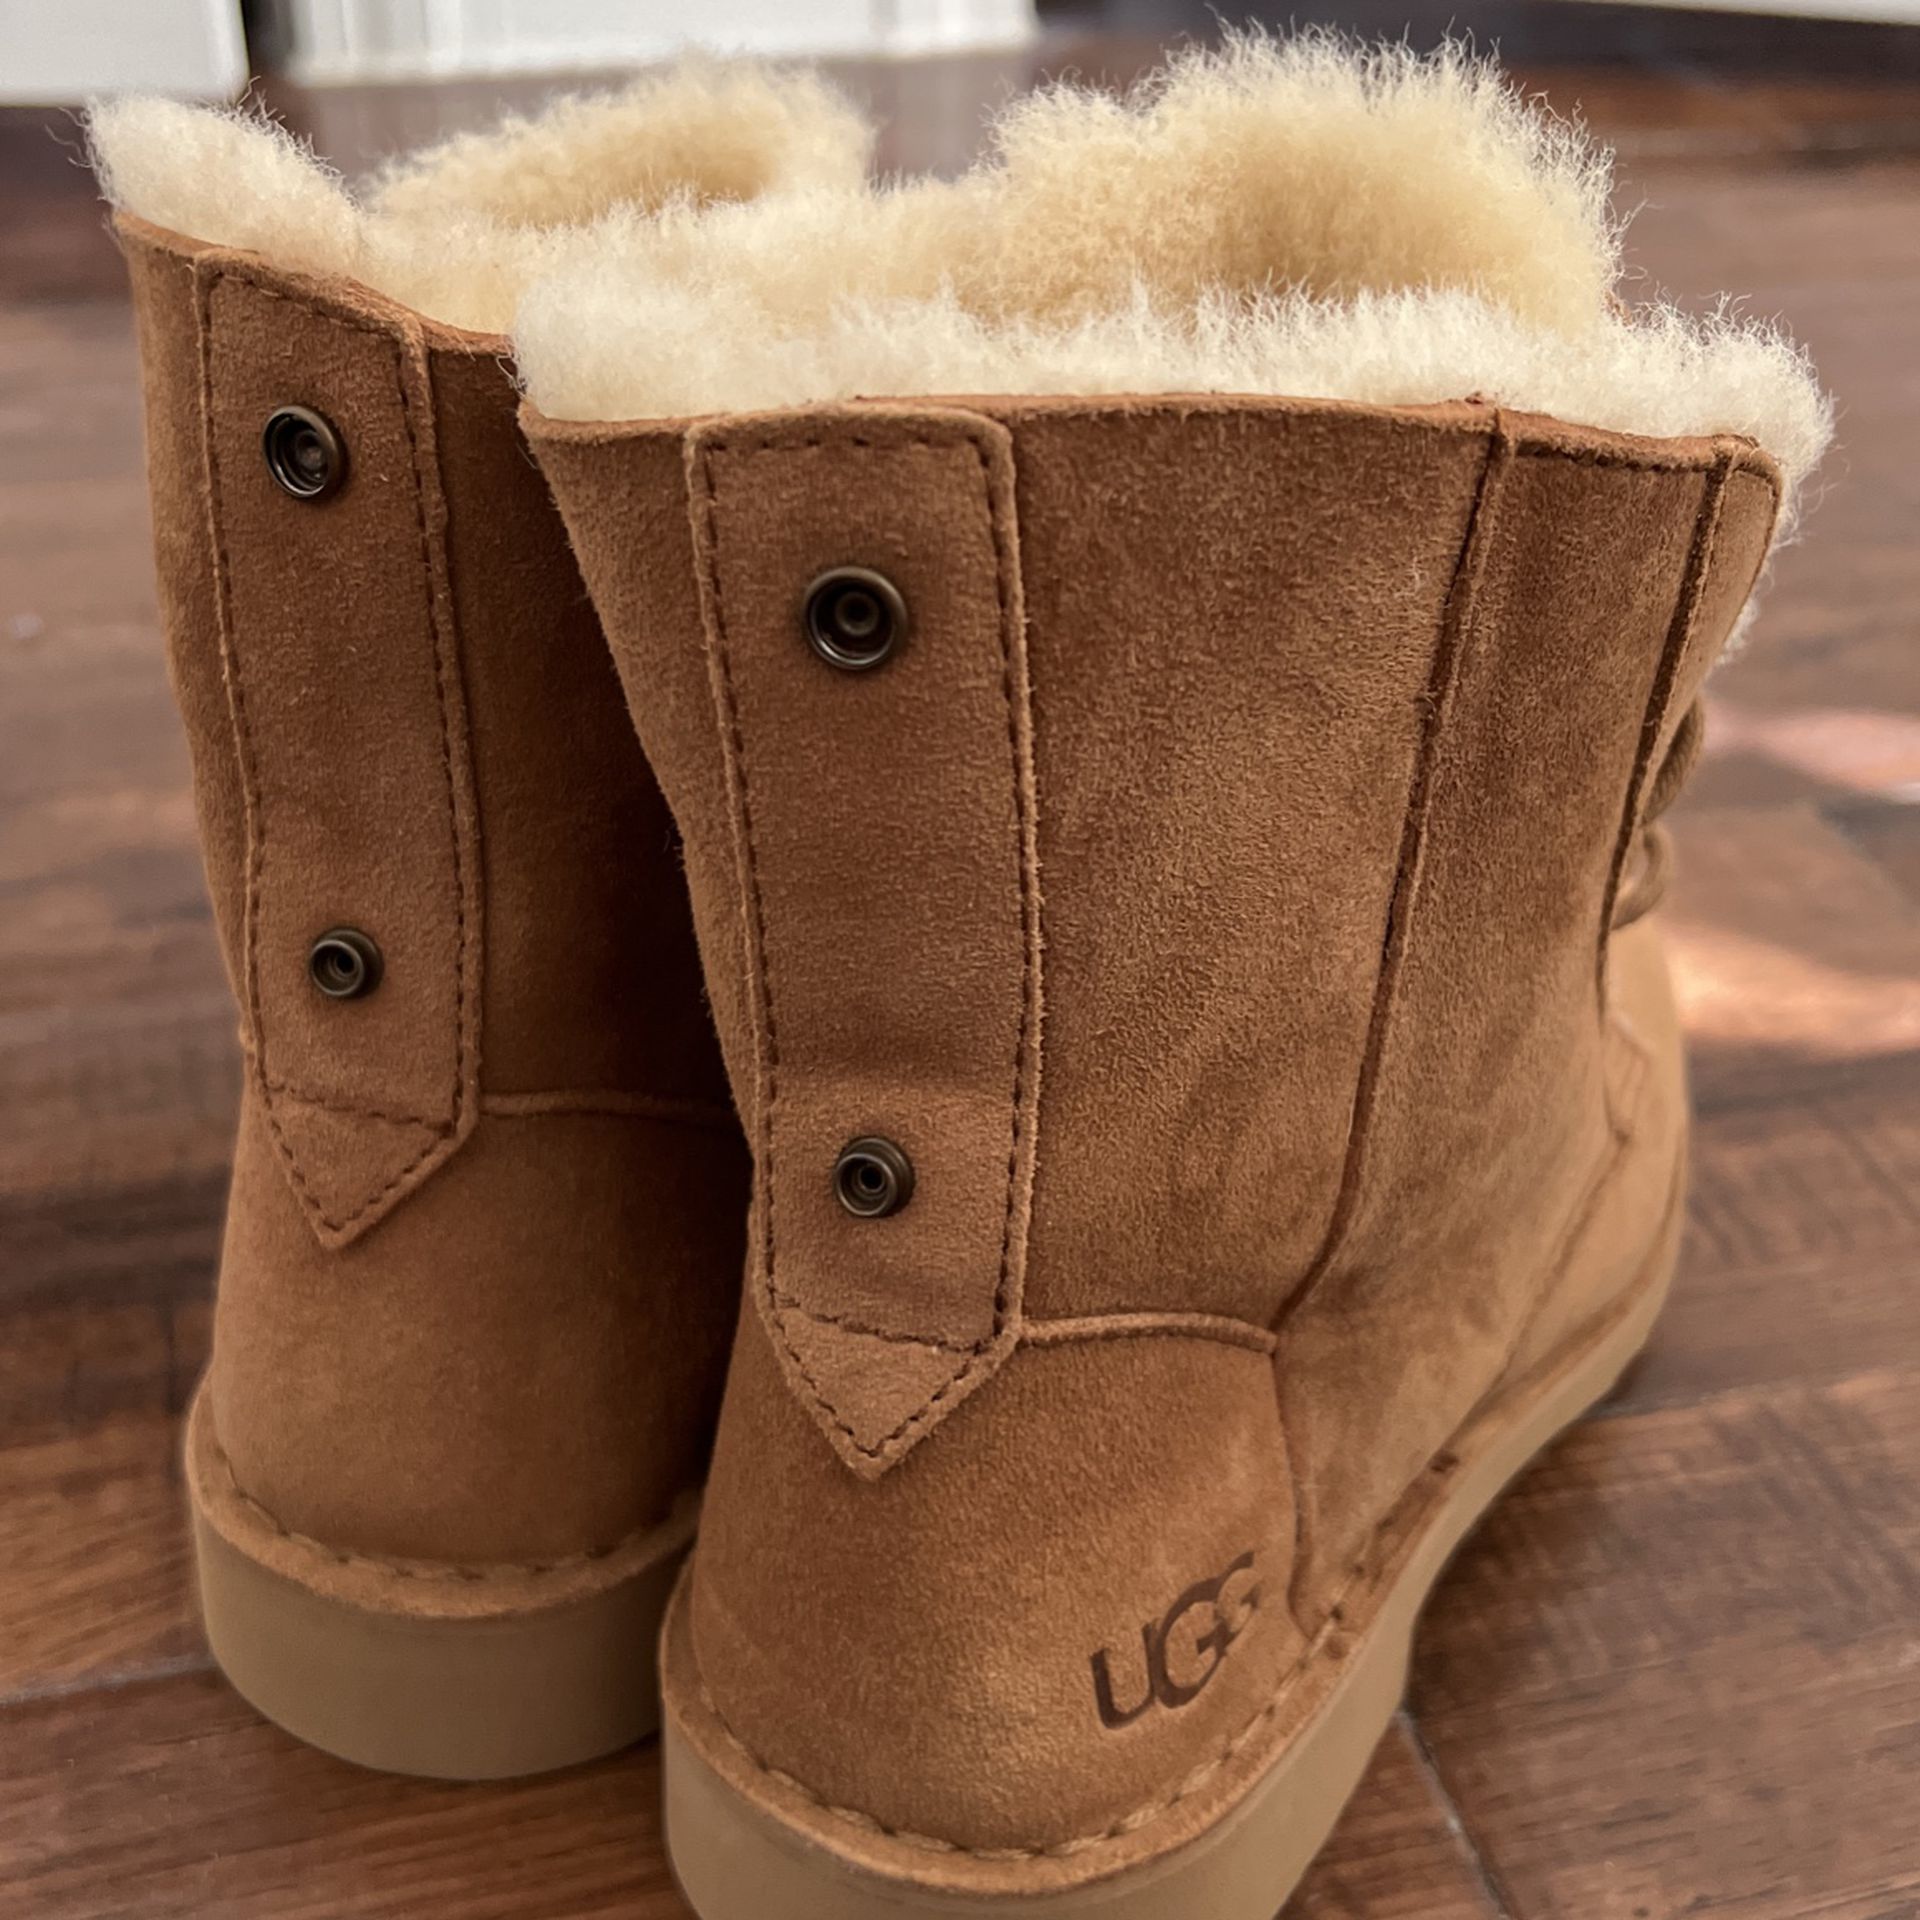 Brand New UGGS Woman’s Size 5 In Chestnut